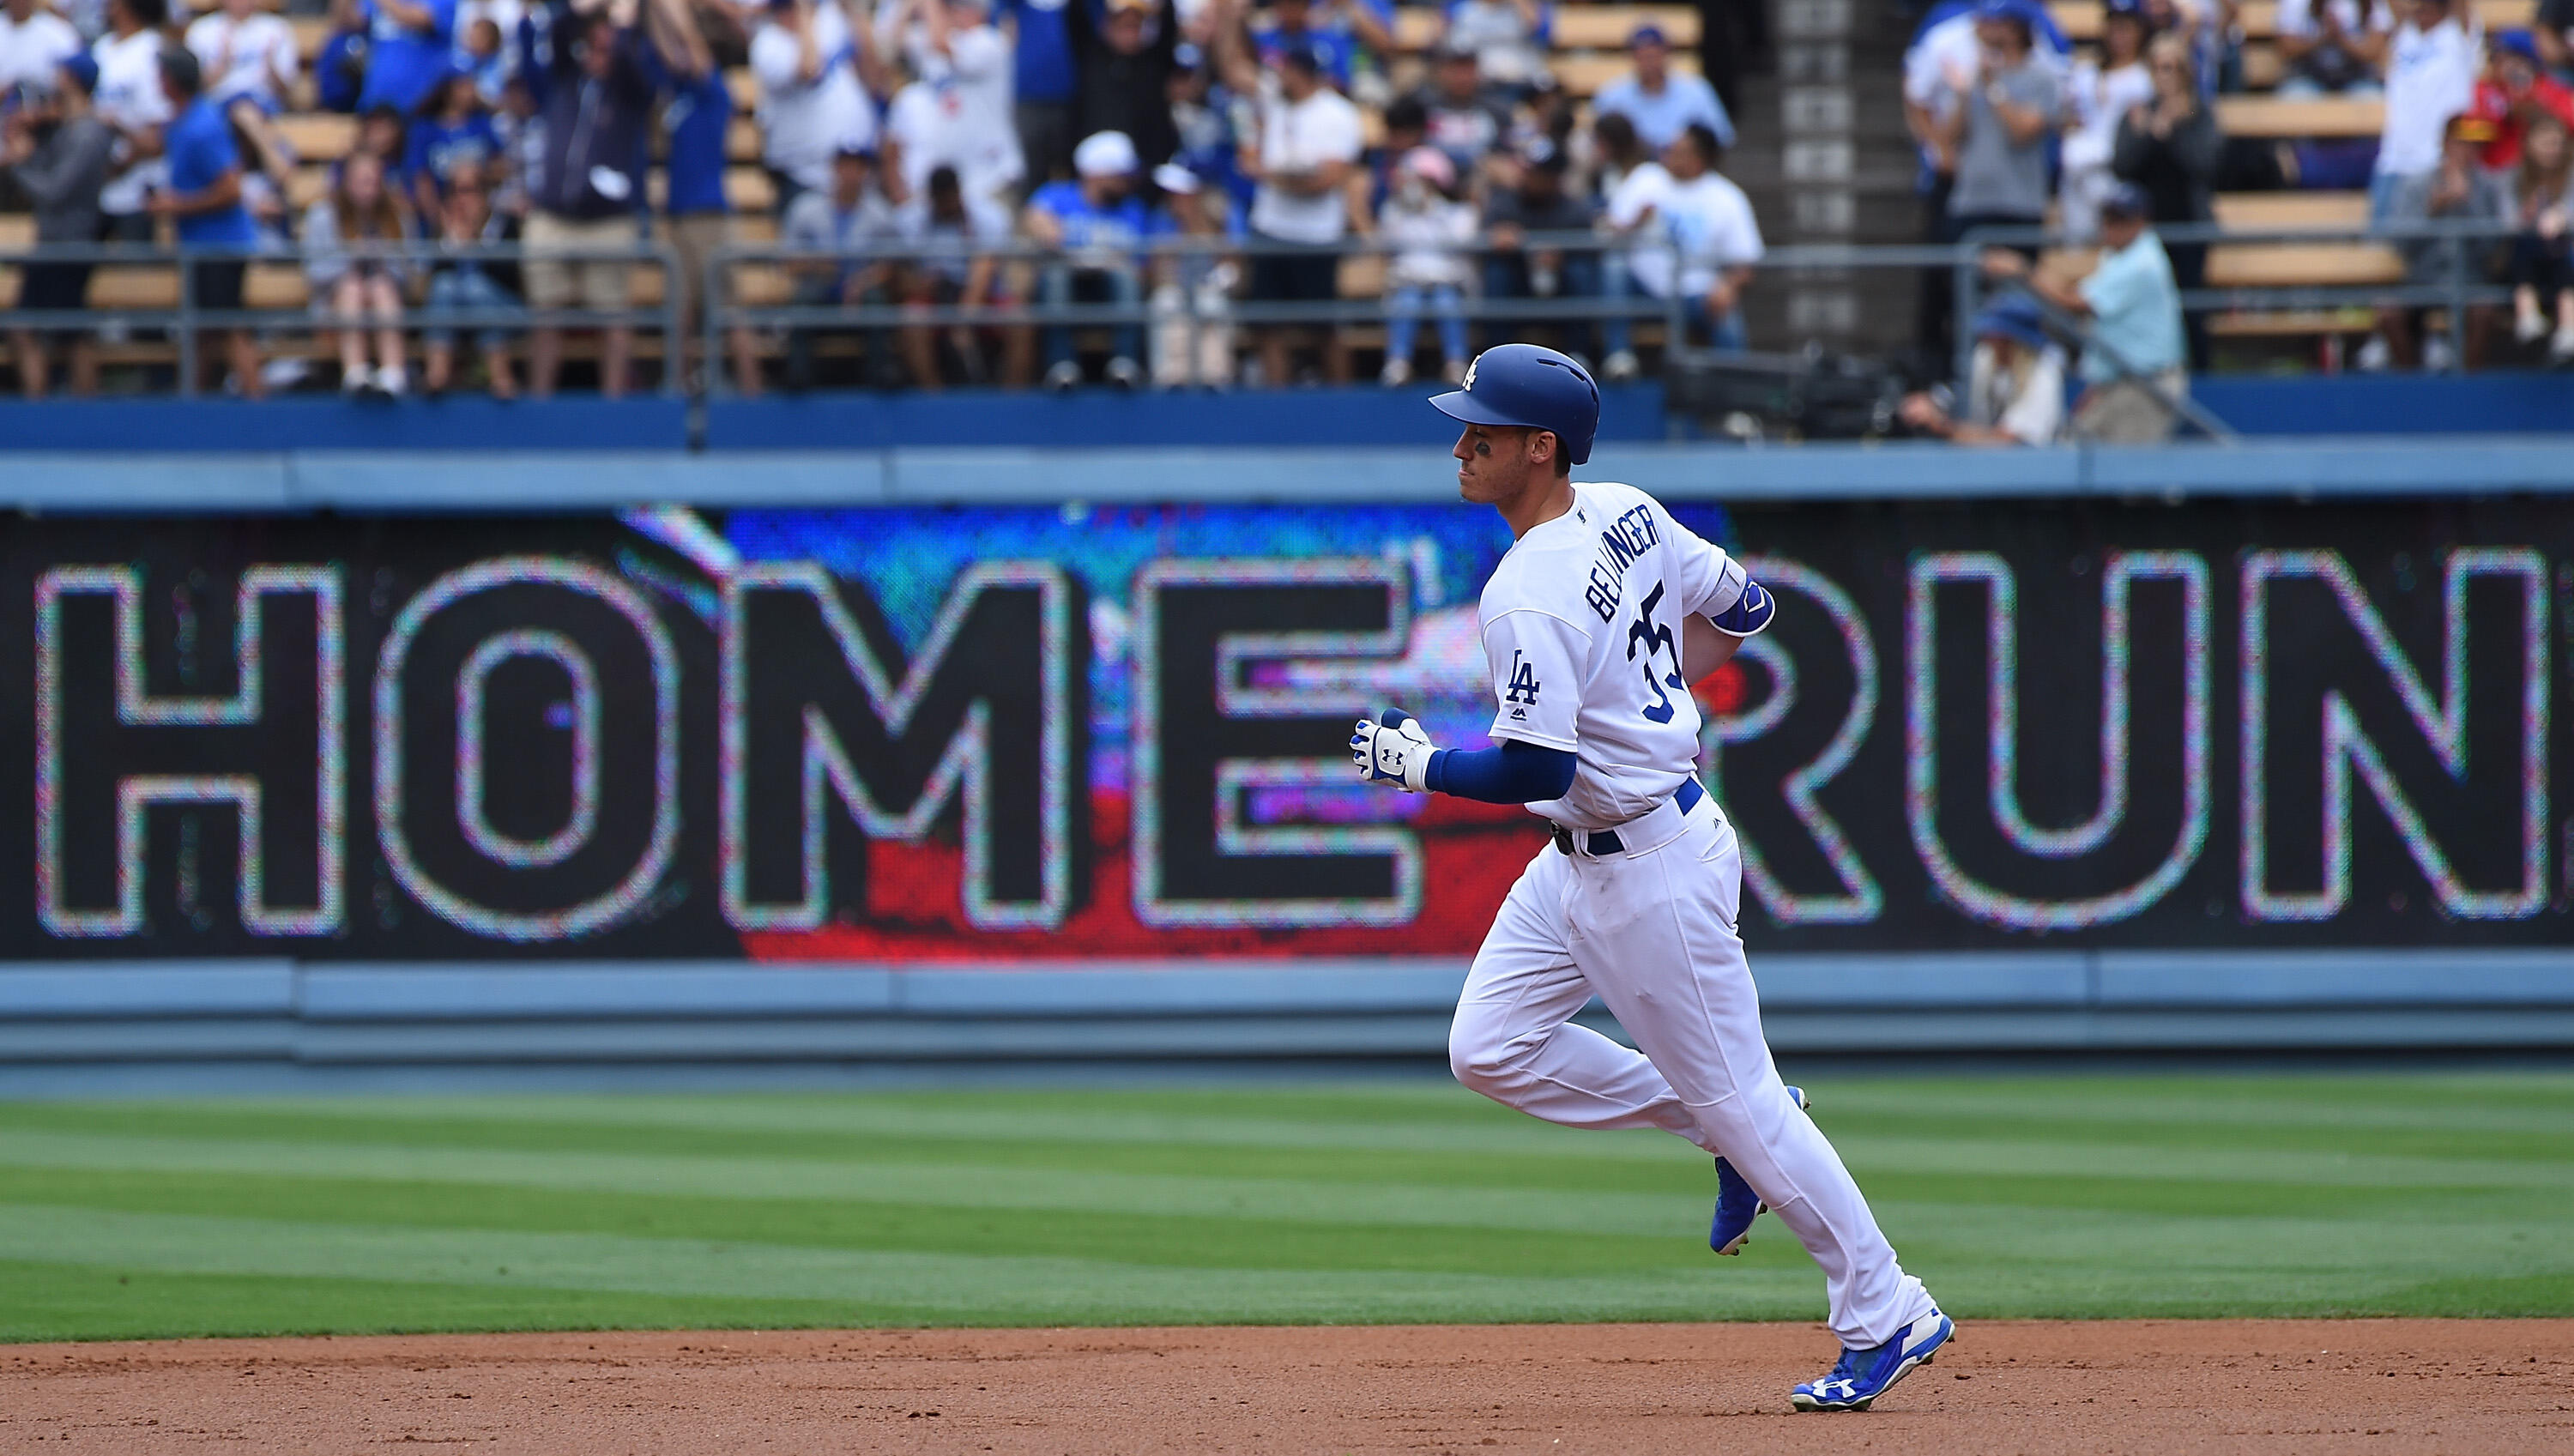 LOS ANGELES, CA - JUNE 11:  Cody Bellinger #35 of the Los Angeles Dodgers rounds the bases after a two run home run in the second inning of the game against the Cincinnati Reds at Dodger Stadium on June 11, 2017 in Los Angeles, California. (Photo by Jayne